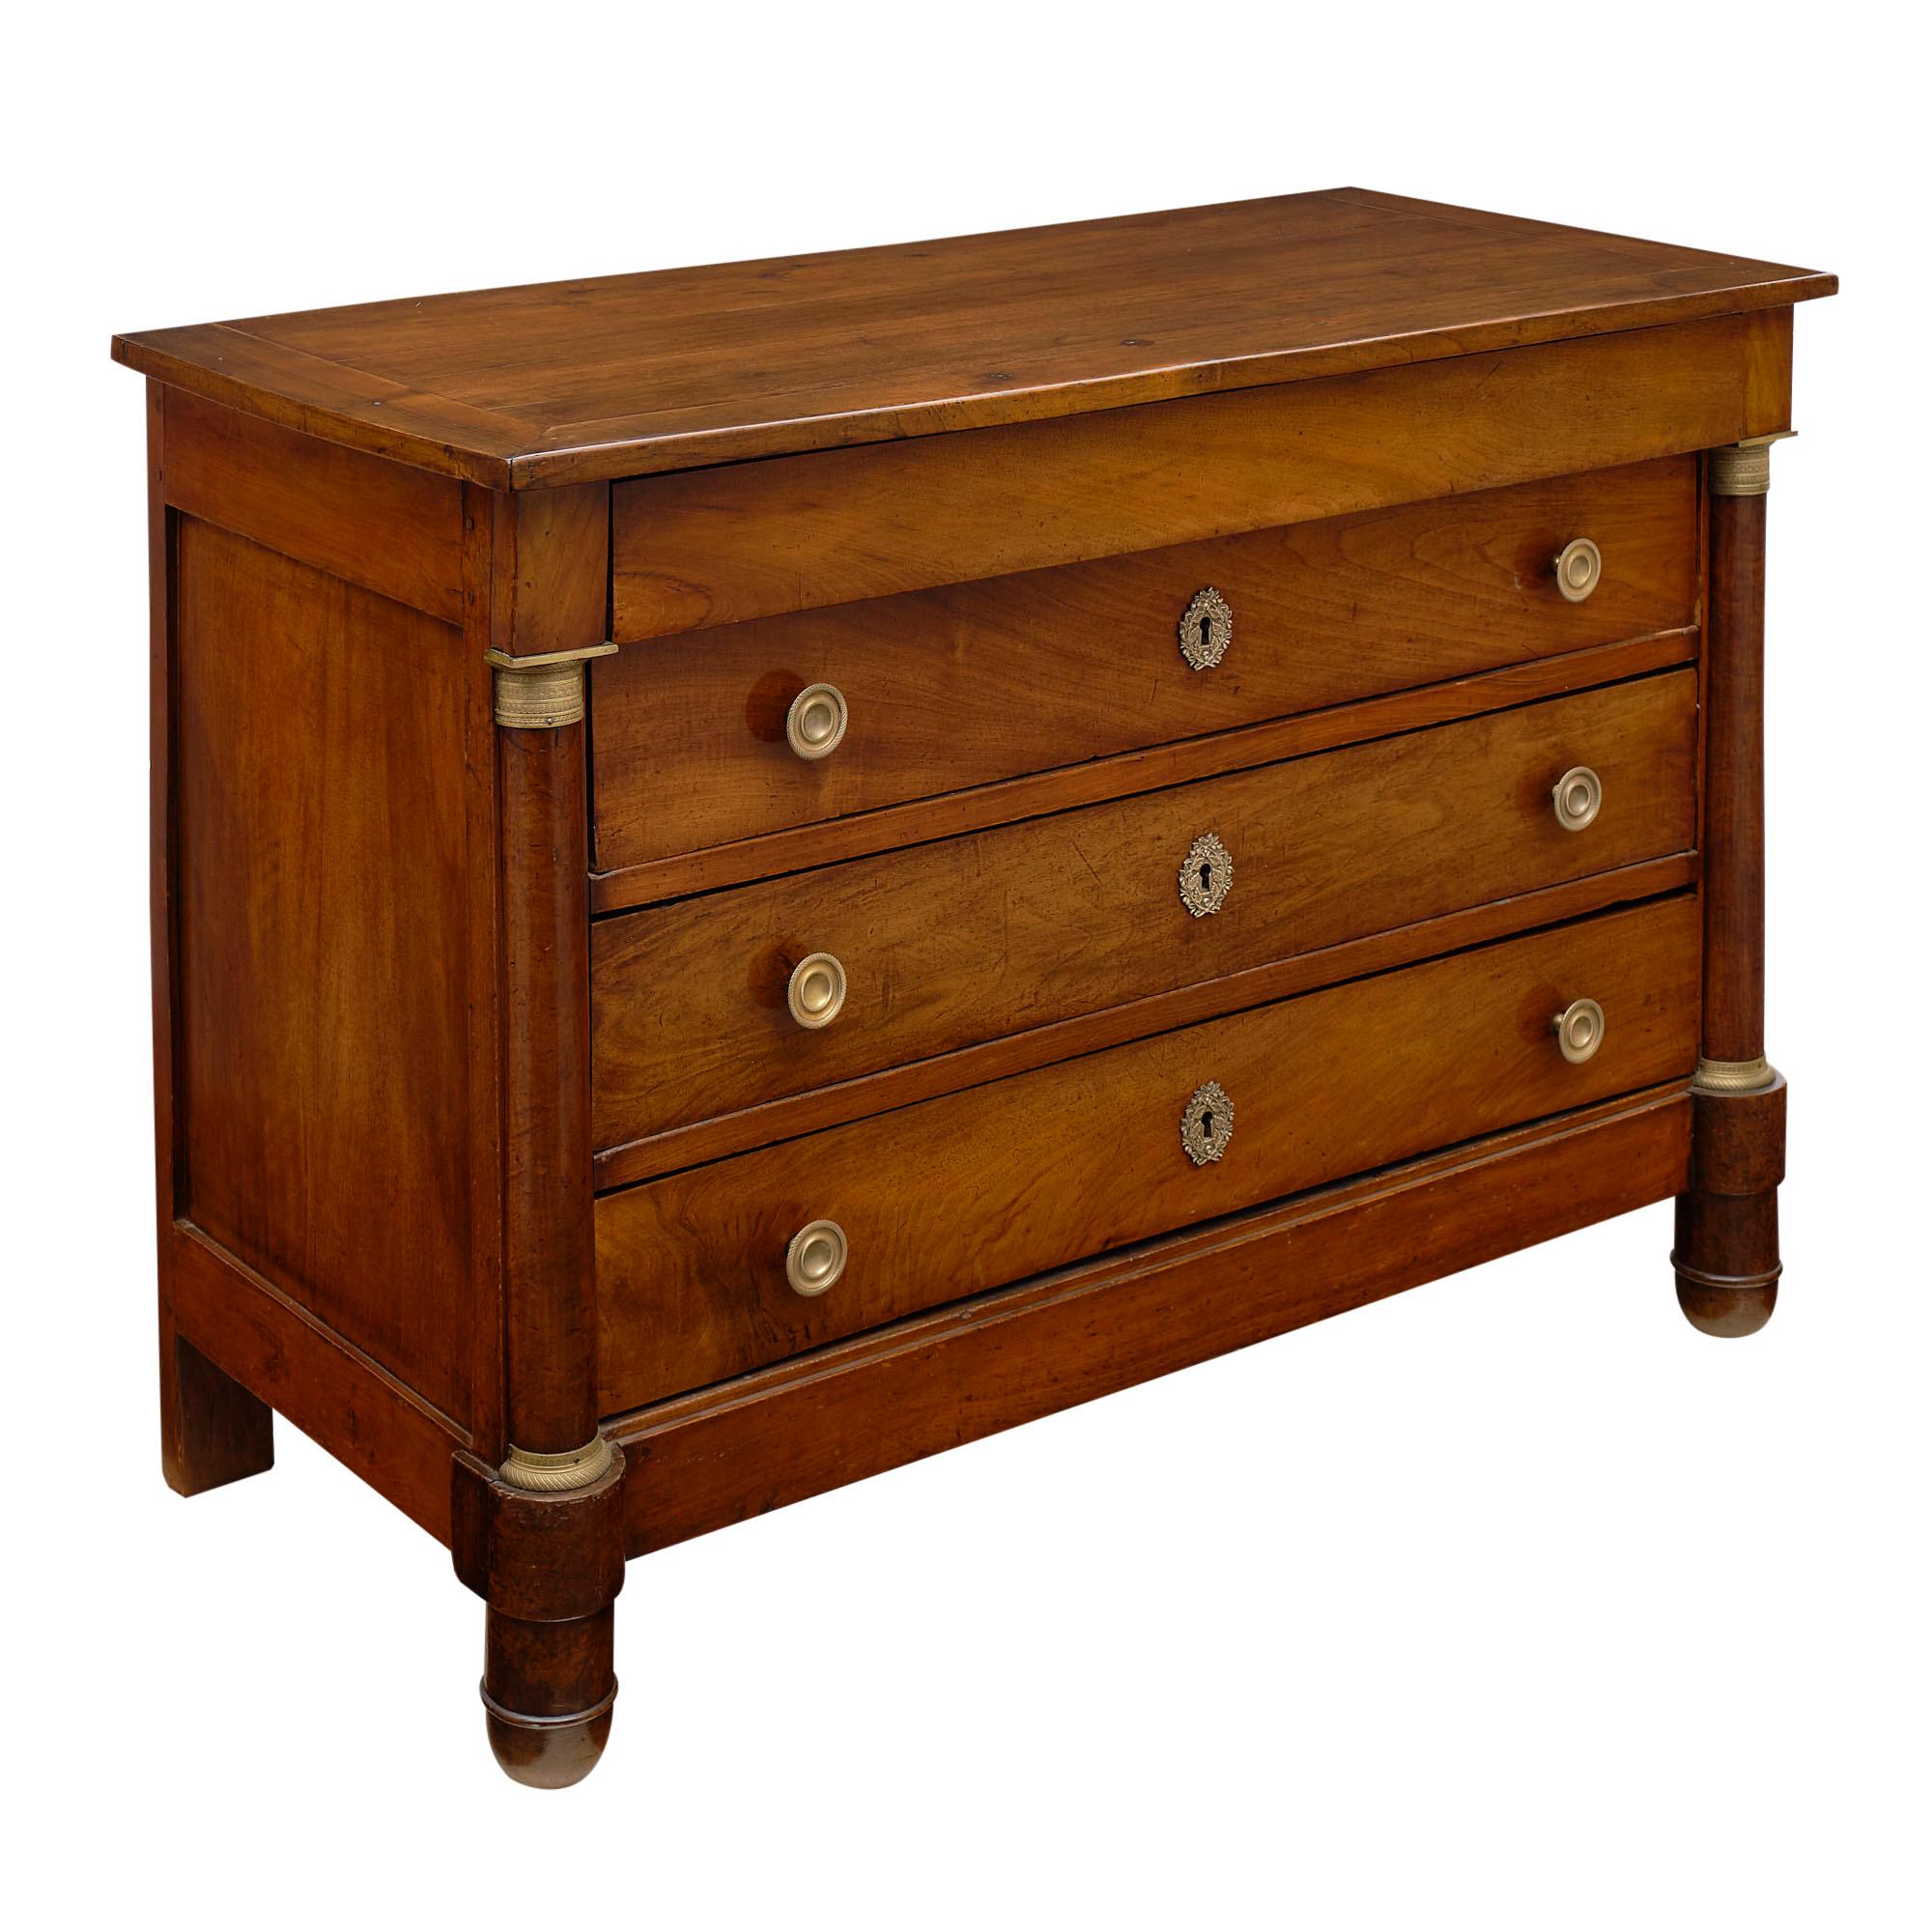 French Empire Period Antique Chest of Drawers